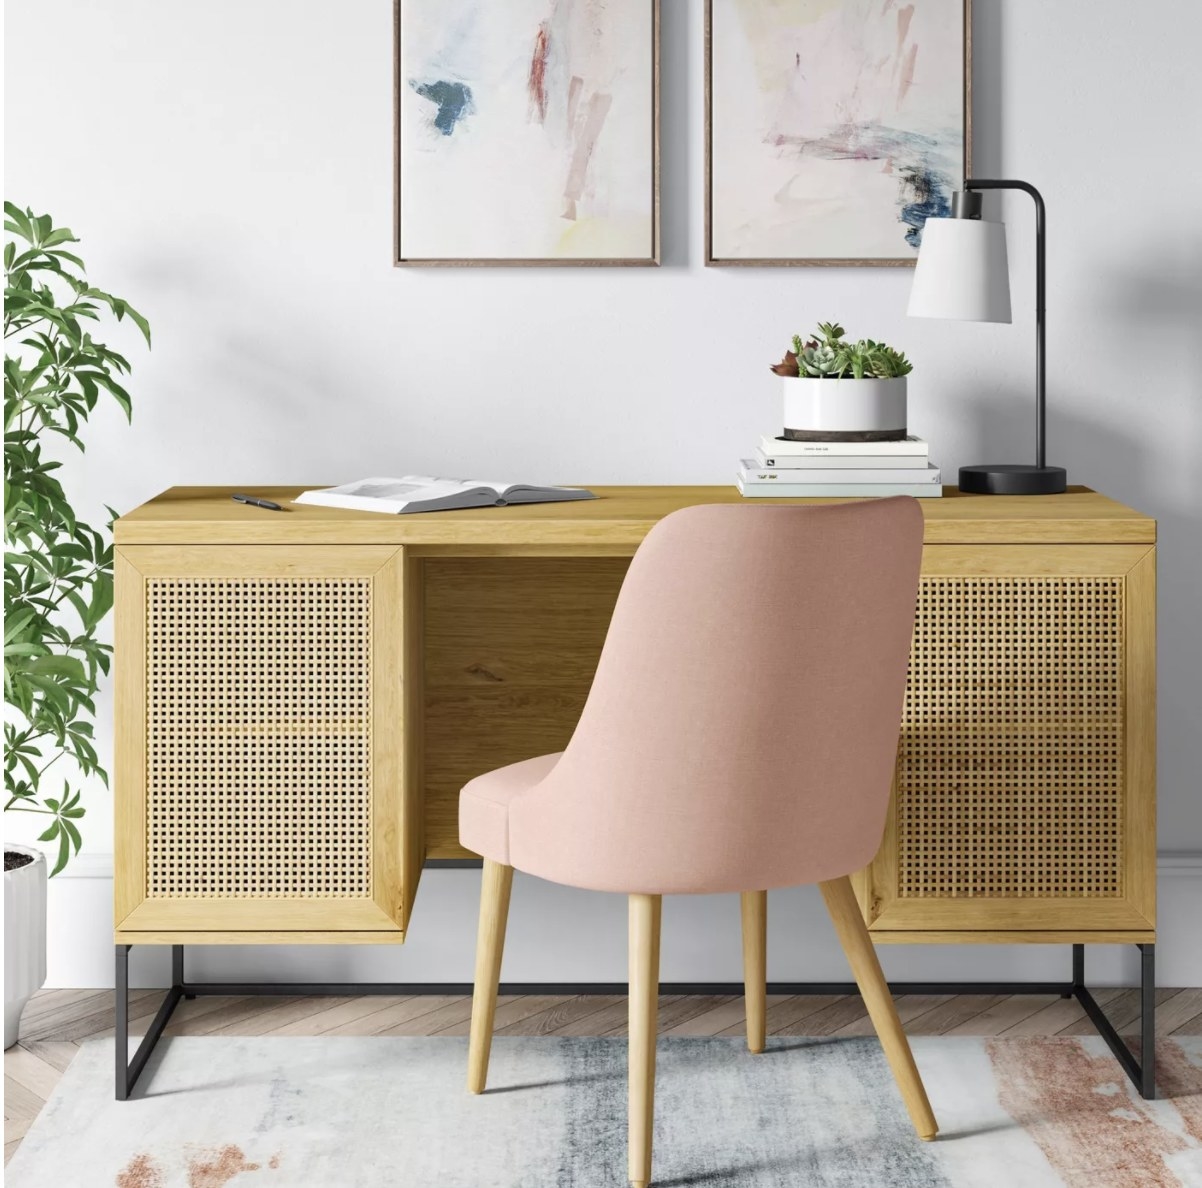 The desk has a flat top with large drawers that have a light yellow lattice design 